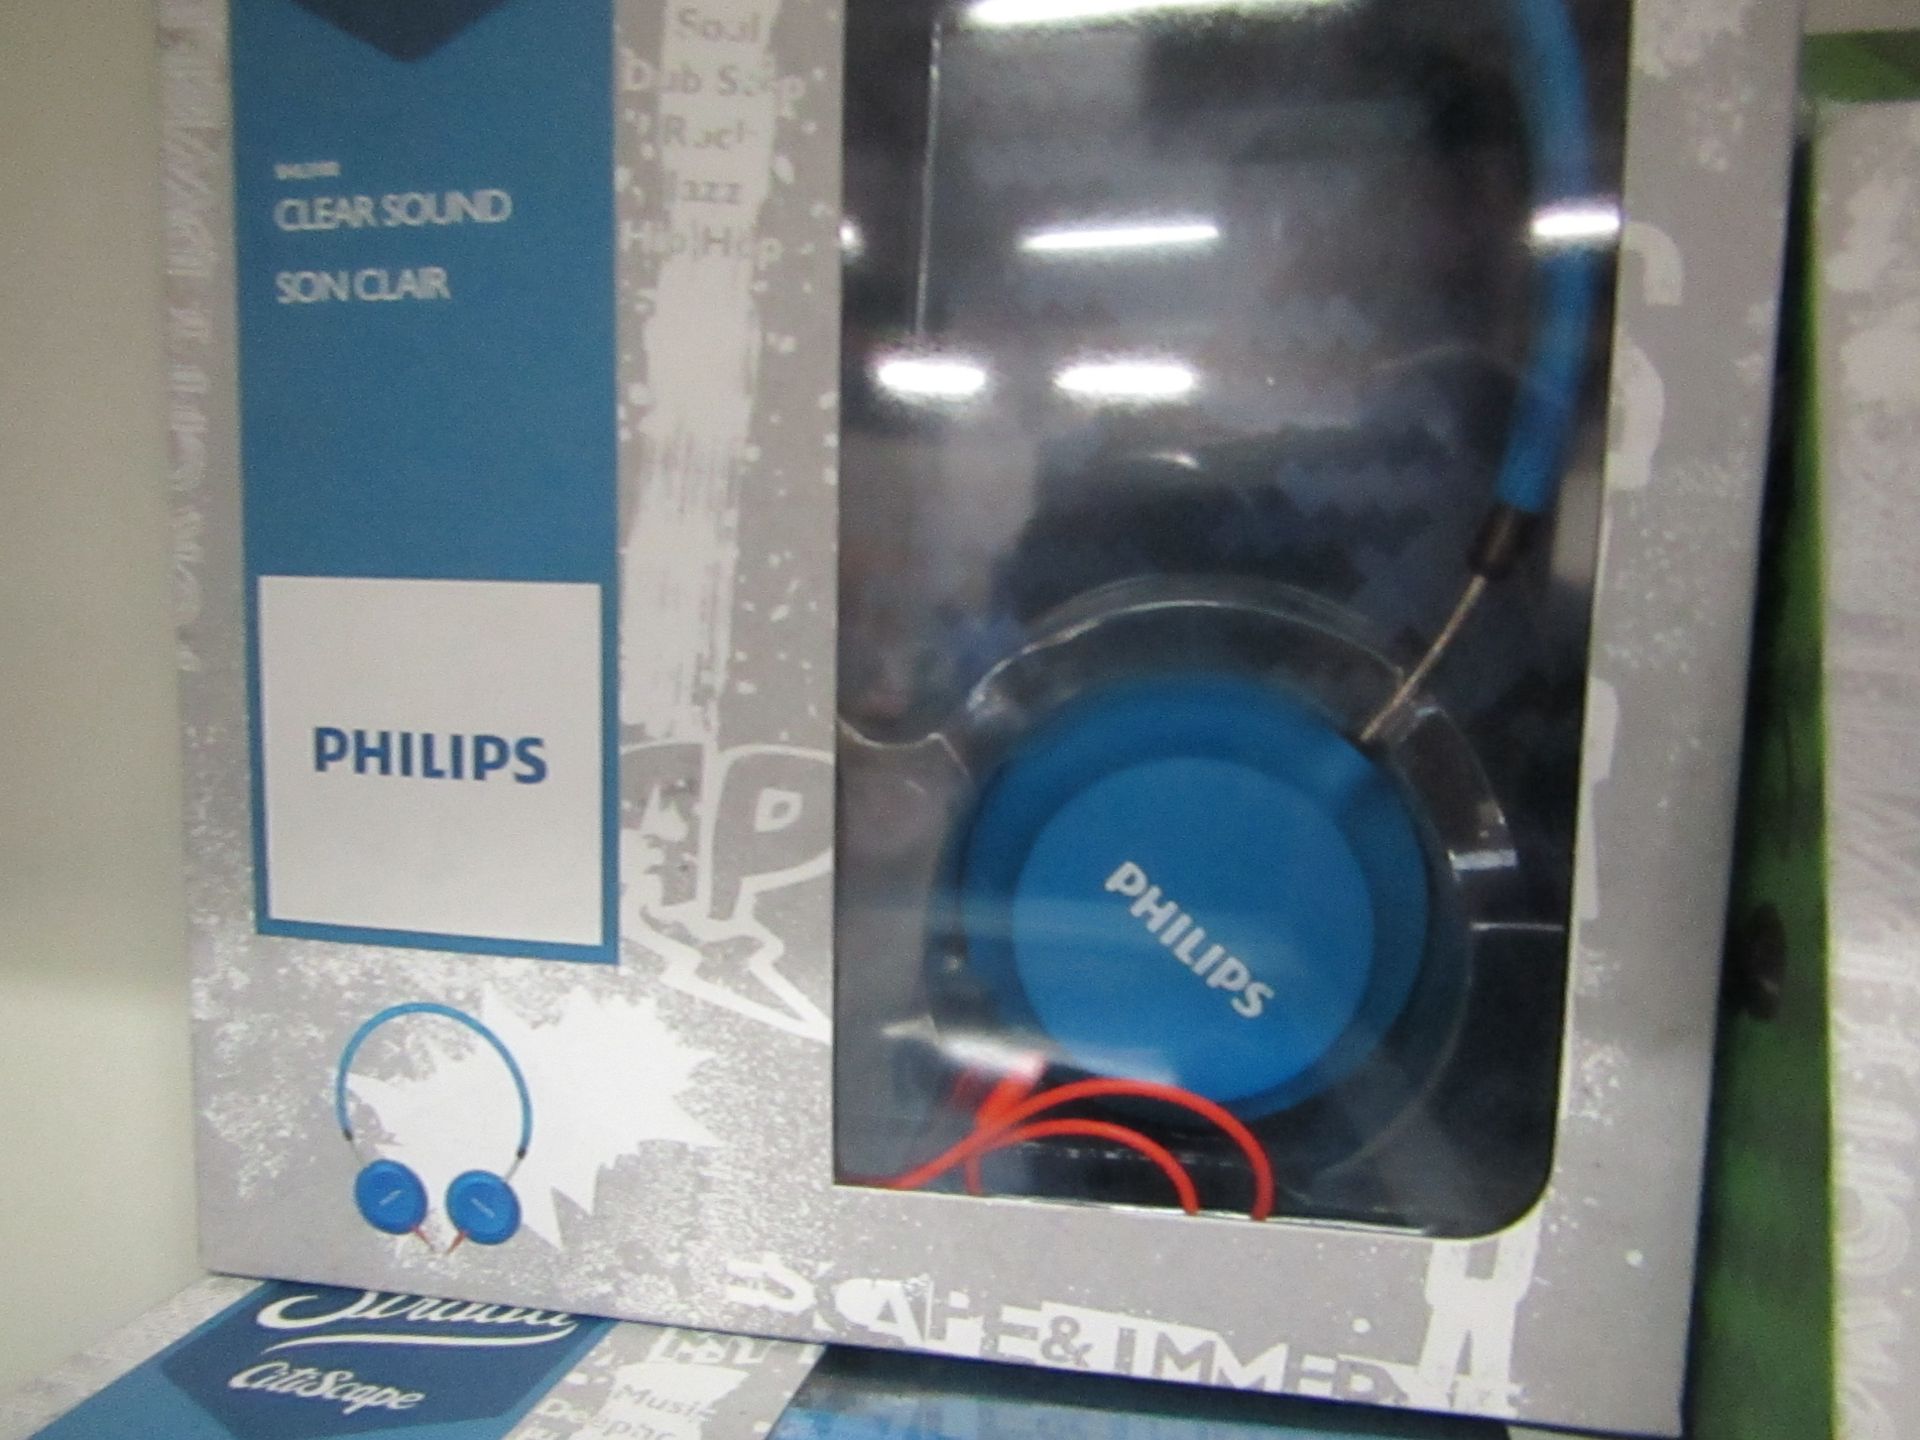 Philips Strada headphones, tested working and boxed.